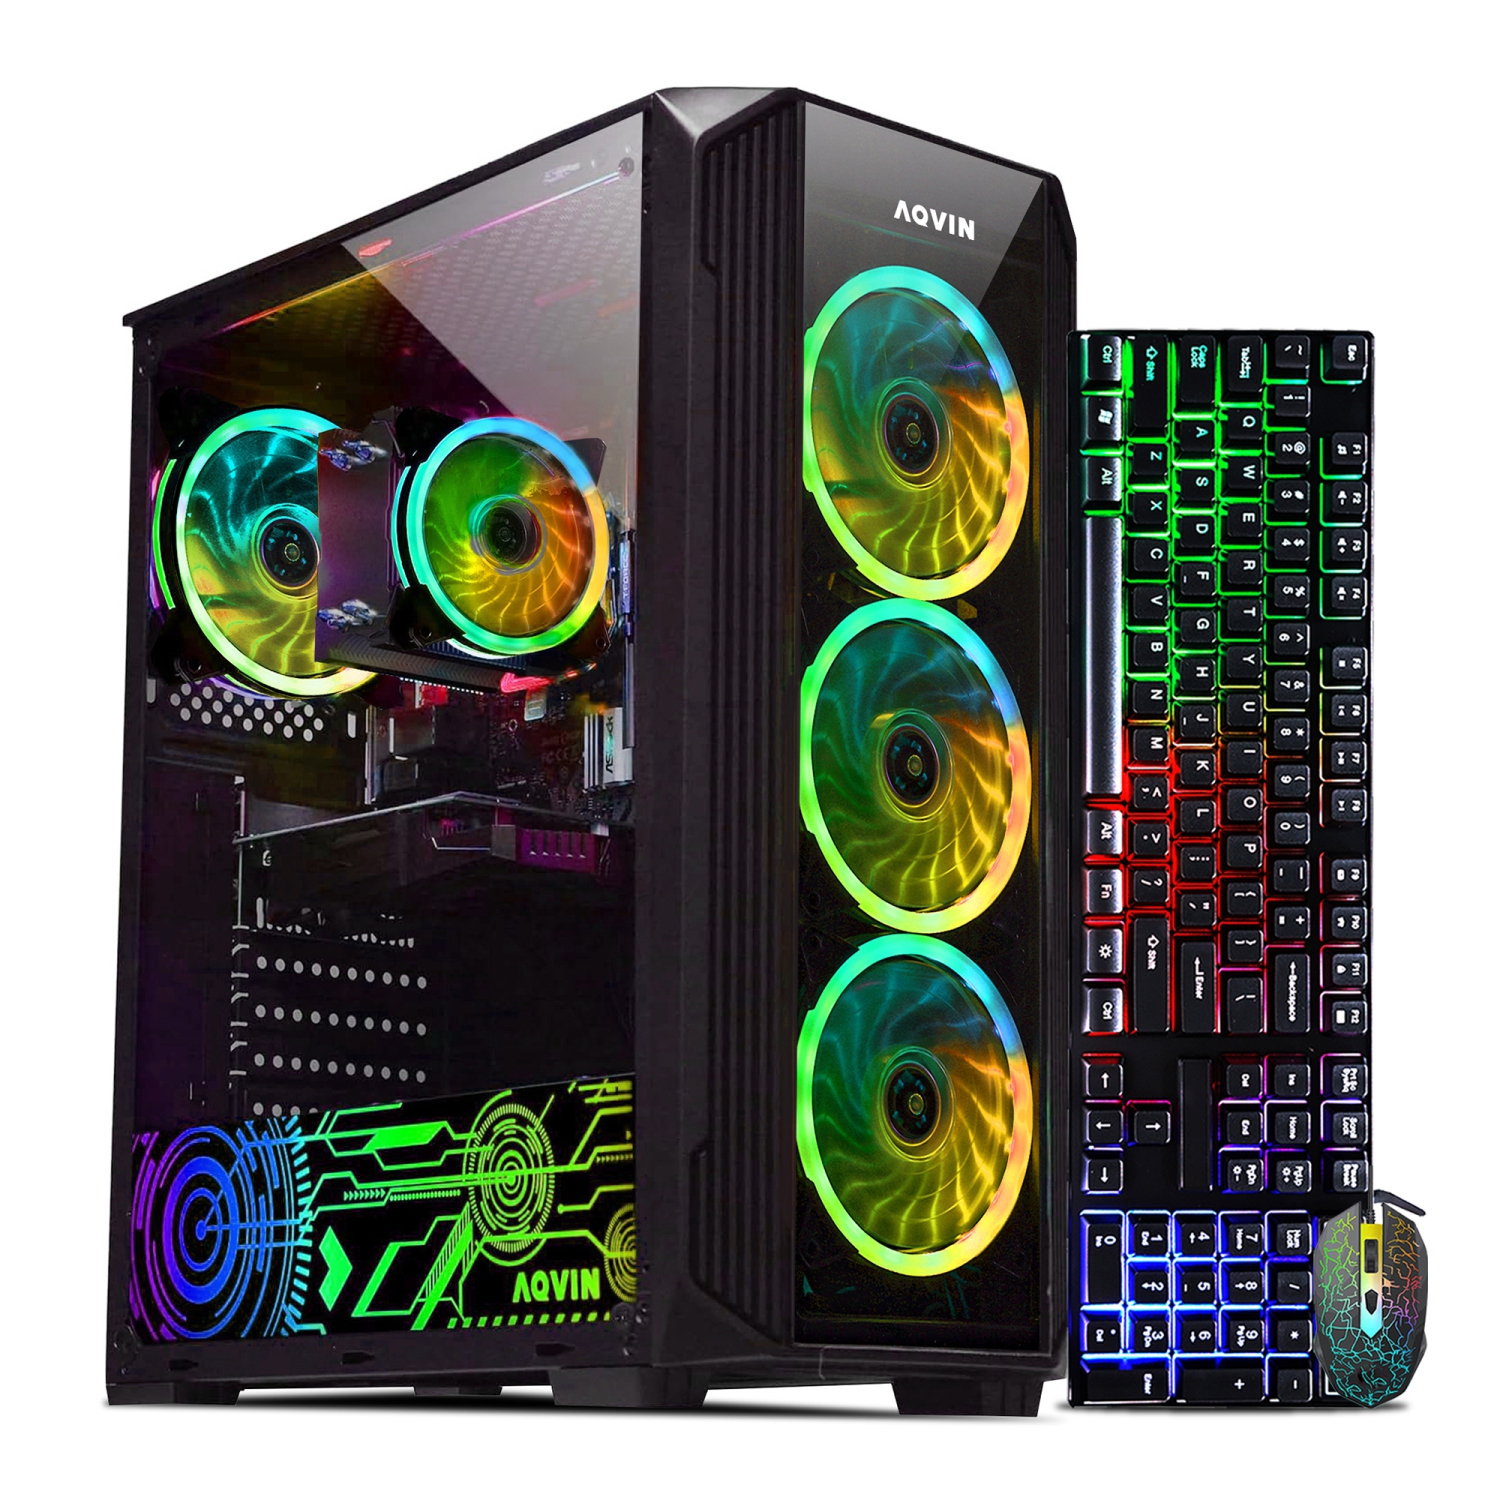 Refurbished (Excellent) Gaming PC AQVIN ZForce Tower (Core i7/ GeForce RTX 3060 12GB/ 2TB SSD(fast boost) + 2TB HDD/ 32GB DDR4 RAM/ WIN 10 Pro) Desktop Computer - Only at Bestbuy